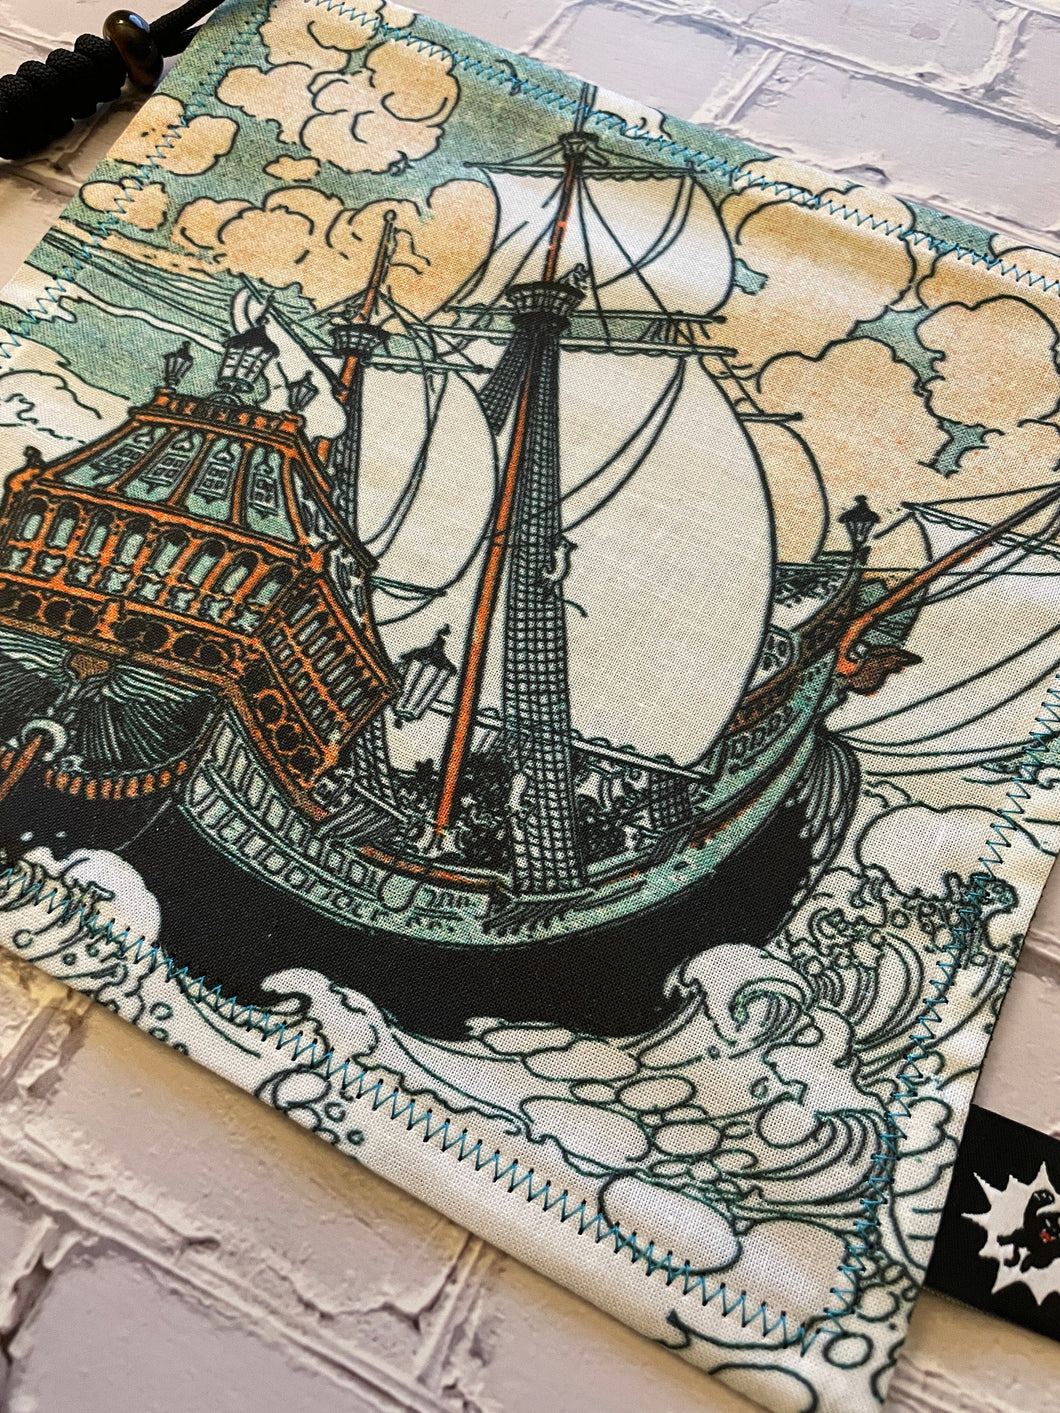 EDC Hank Limited Edition | EDC Gear Hankerchief | Nautical Hank for Bag, Pouch, Or Tray | Ship Ocean Pirate |  Everyday Carry Handkerchief